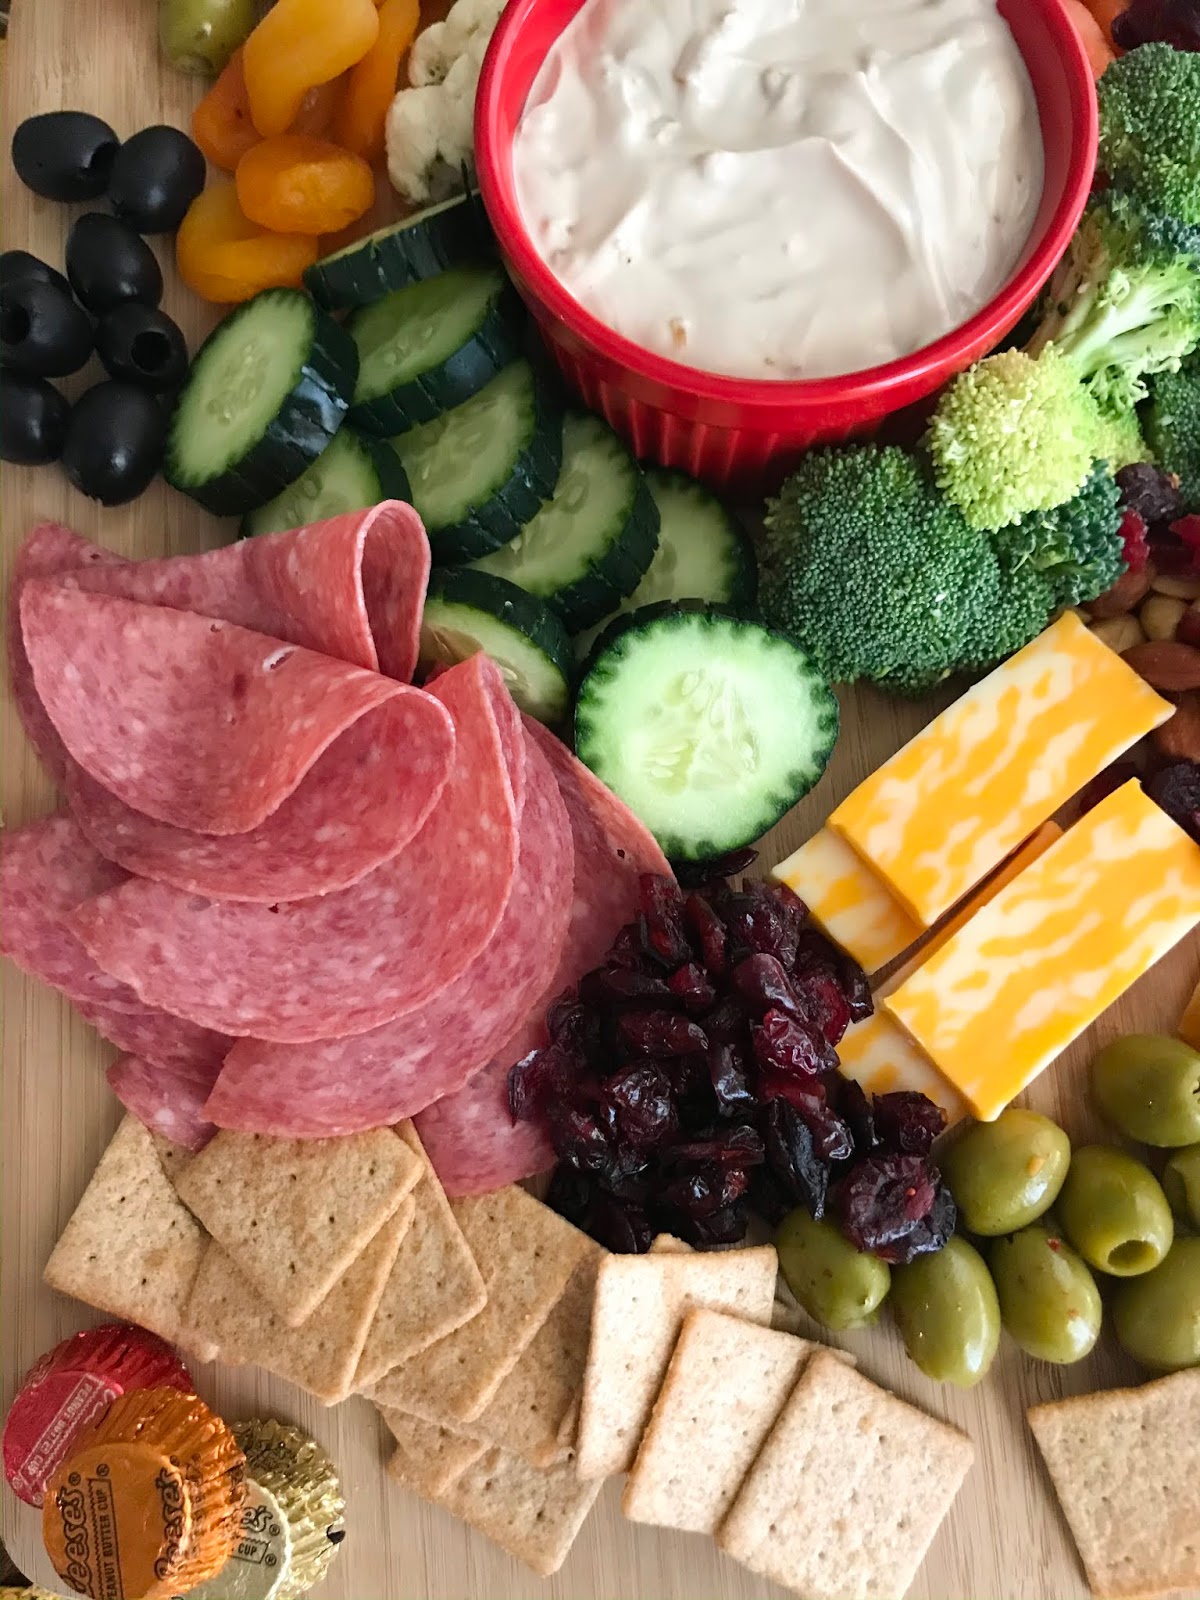 Clover House: Charcuterie Board for Two or More